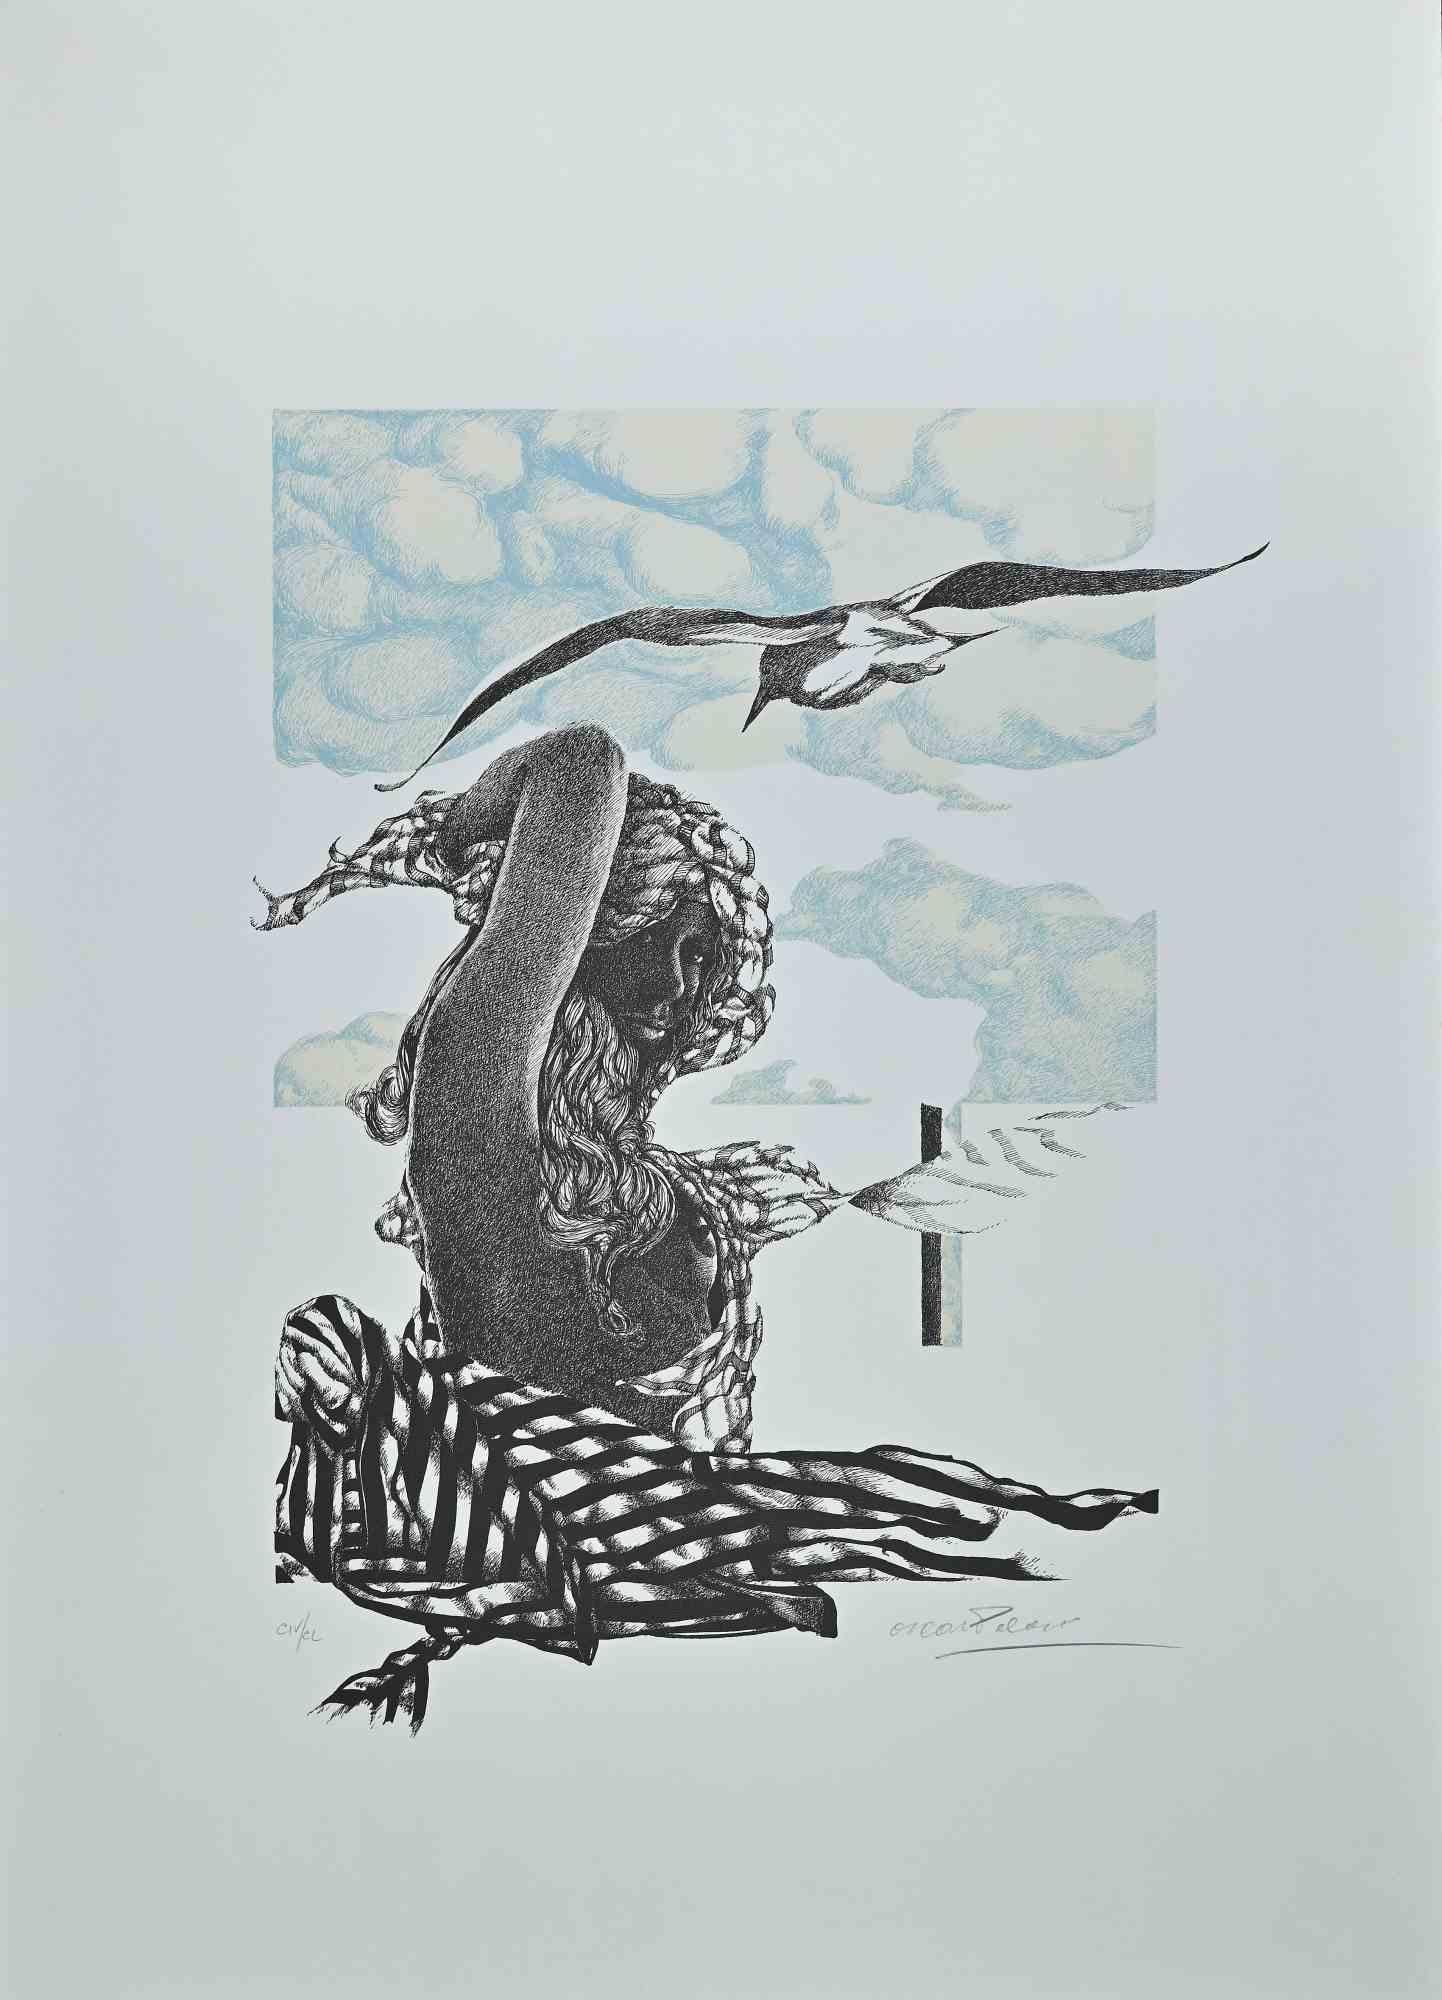 The Woman With Bird is an original colored  Lithograph realized by Oscar Pelosi during the 1980s .

The artwork is hand-signed in pencil by the artist on the lower right. Numbered, on the lower left.

Good conditions.

With the label of certificate